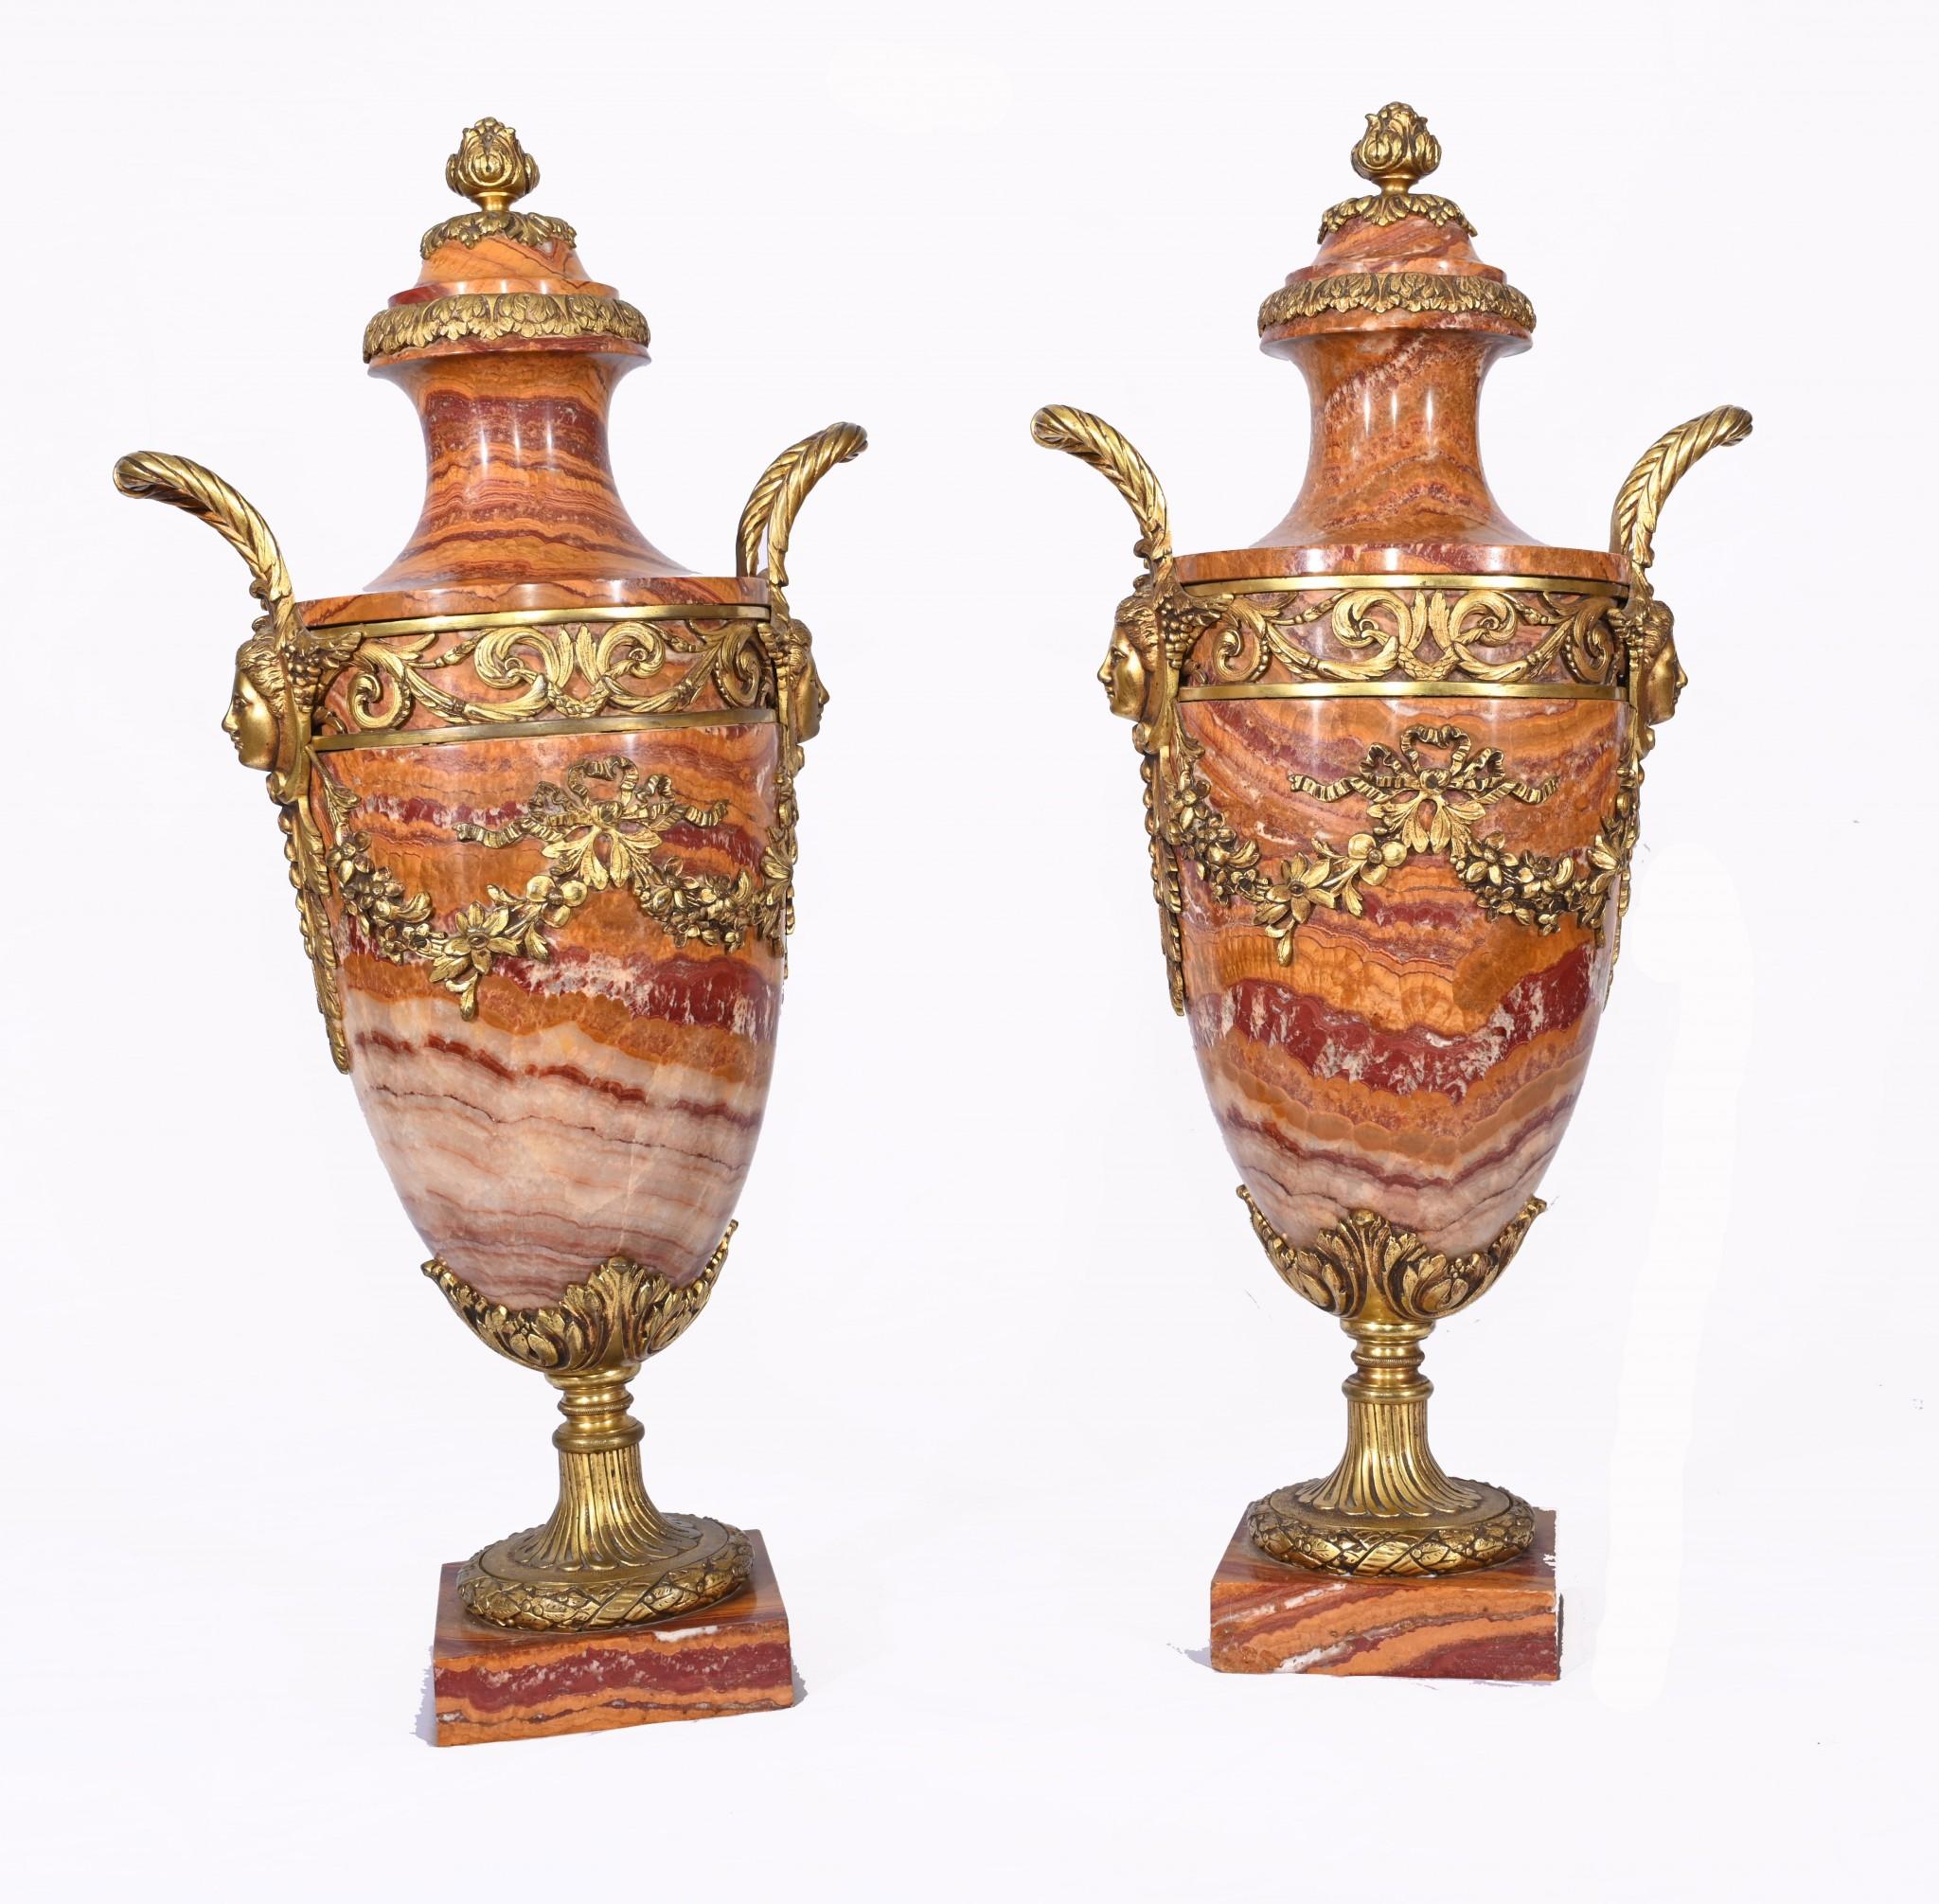 Gorgeous pair of French Empire marble cassoulets 
Classic urns of amphora form 
Beautiful tones of marble including salmon pink, orange, cream and burgundy
Ormolu fixtures are original and finely cast
Purchased from a dealer on Marche Biron at Paris